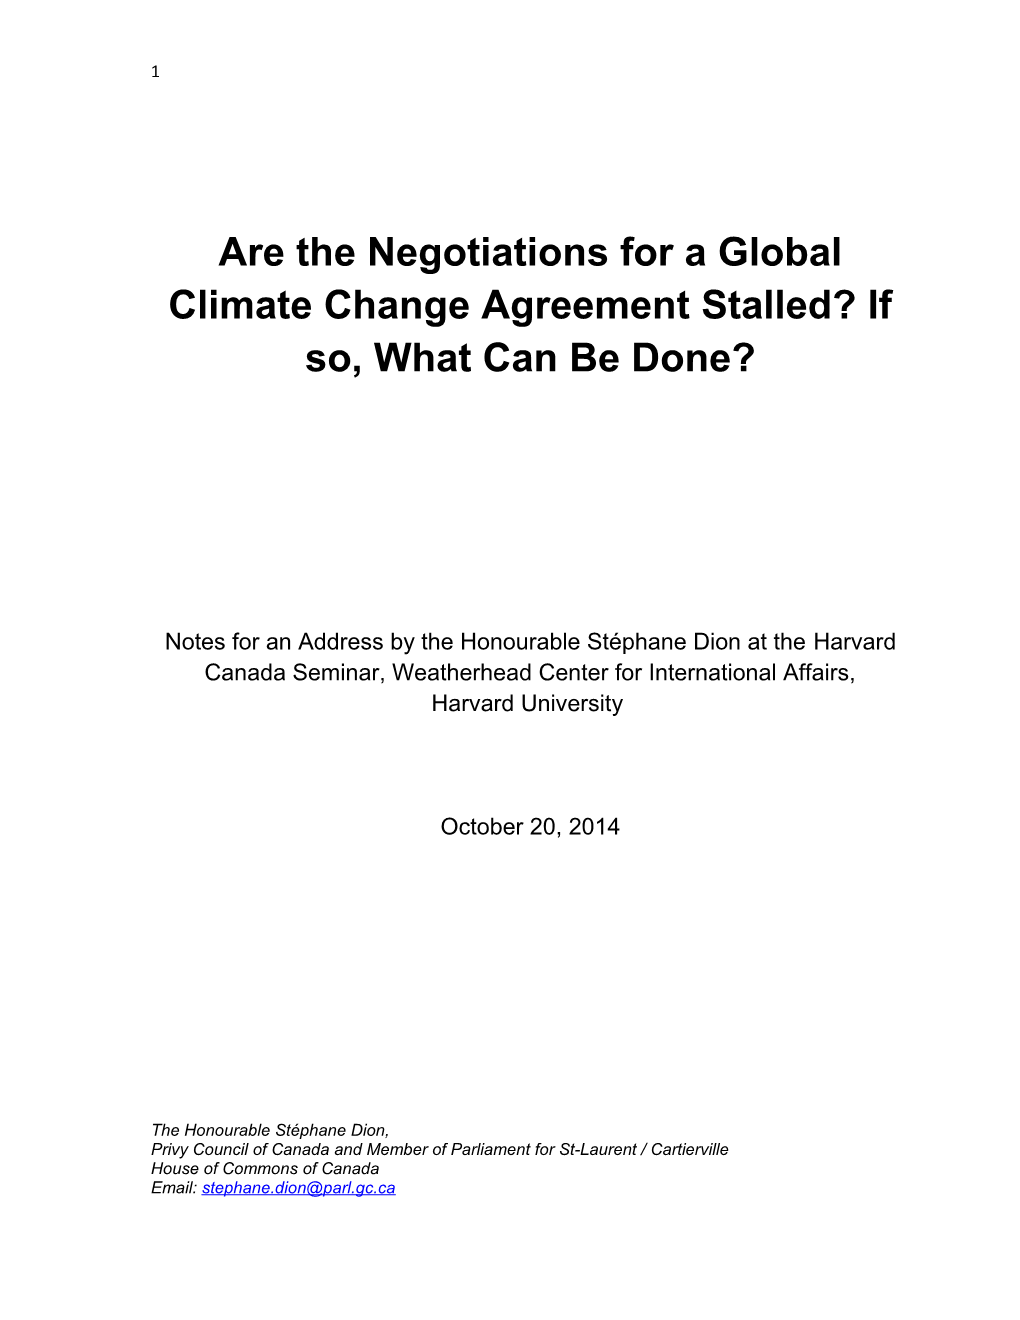 Are the Negotiations for a Global Climate Change Agreement Stalled? If So, What Can Be Done?